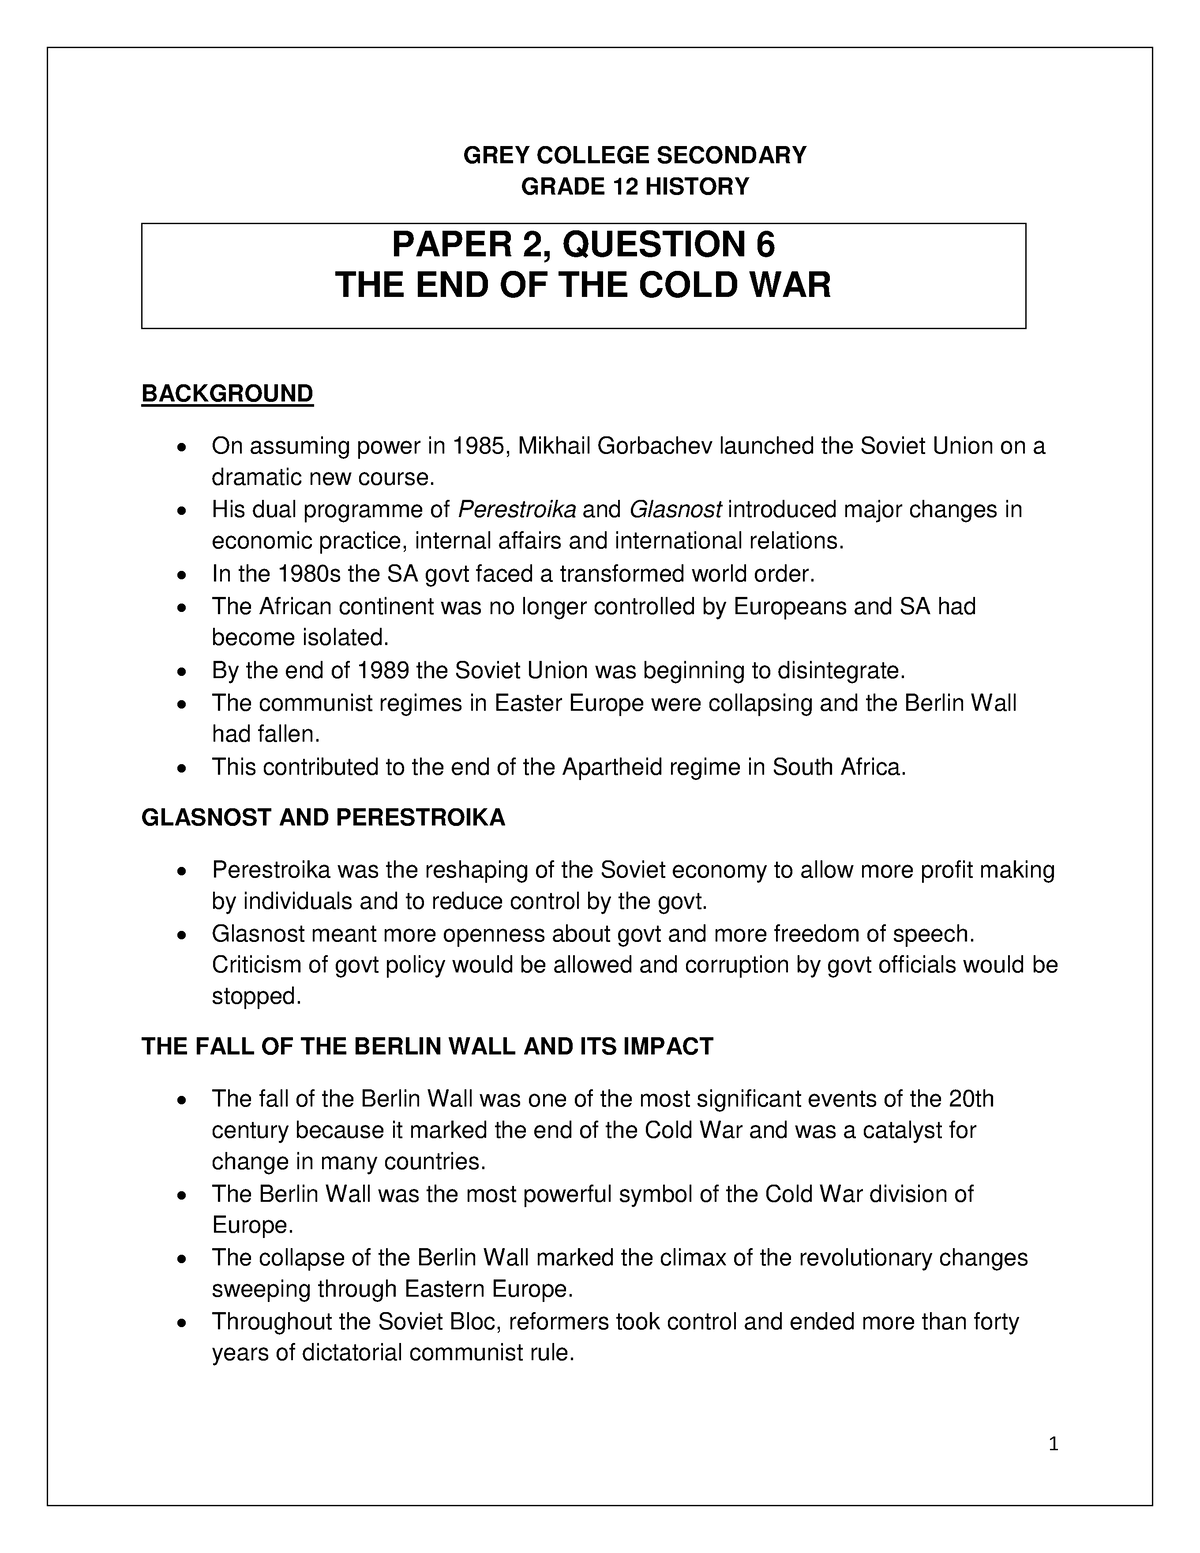 the end of cold war essay grade 12 pdf notes